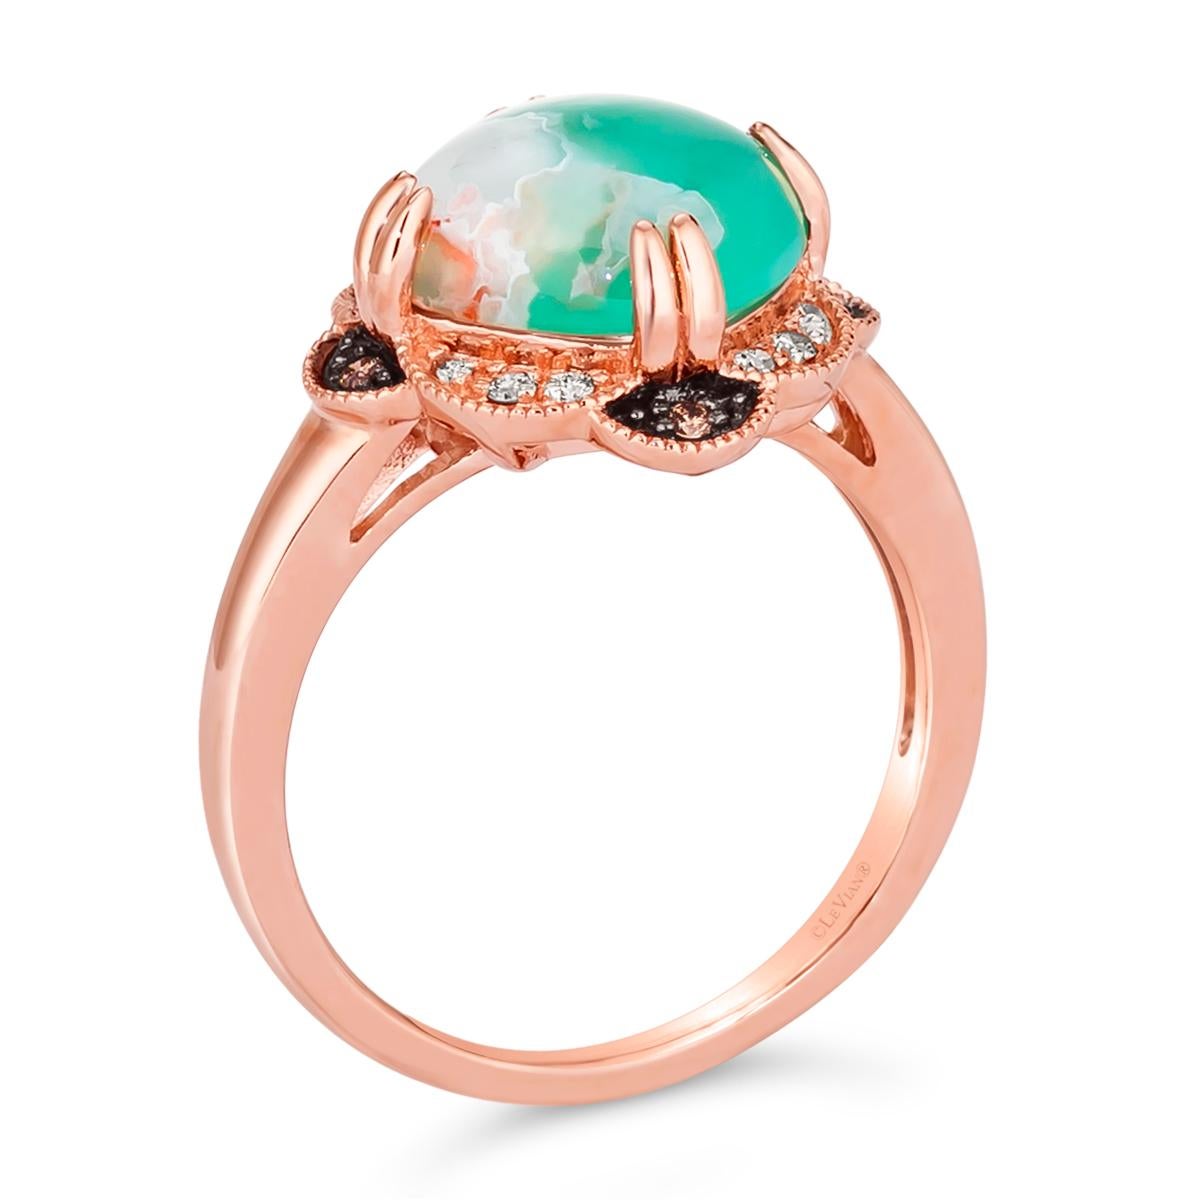 Levian Rose Gold Plated Silver Natural Aquraprase Topaz Cocktail Ring Size 9 In New Condition For Sale In Great Neck, NY